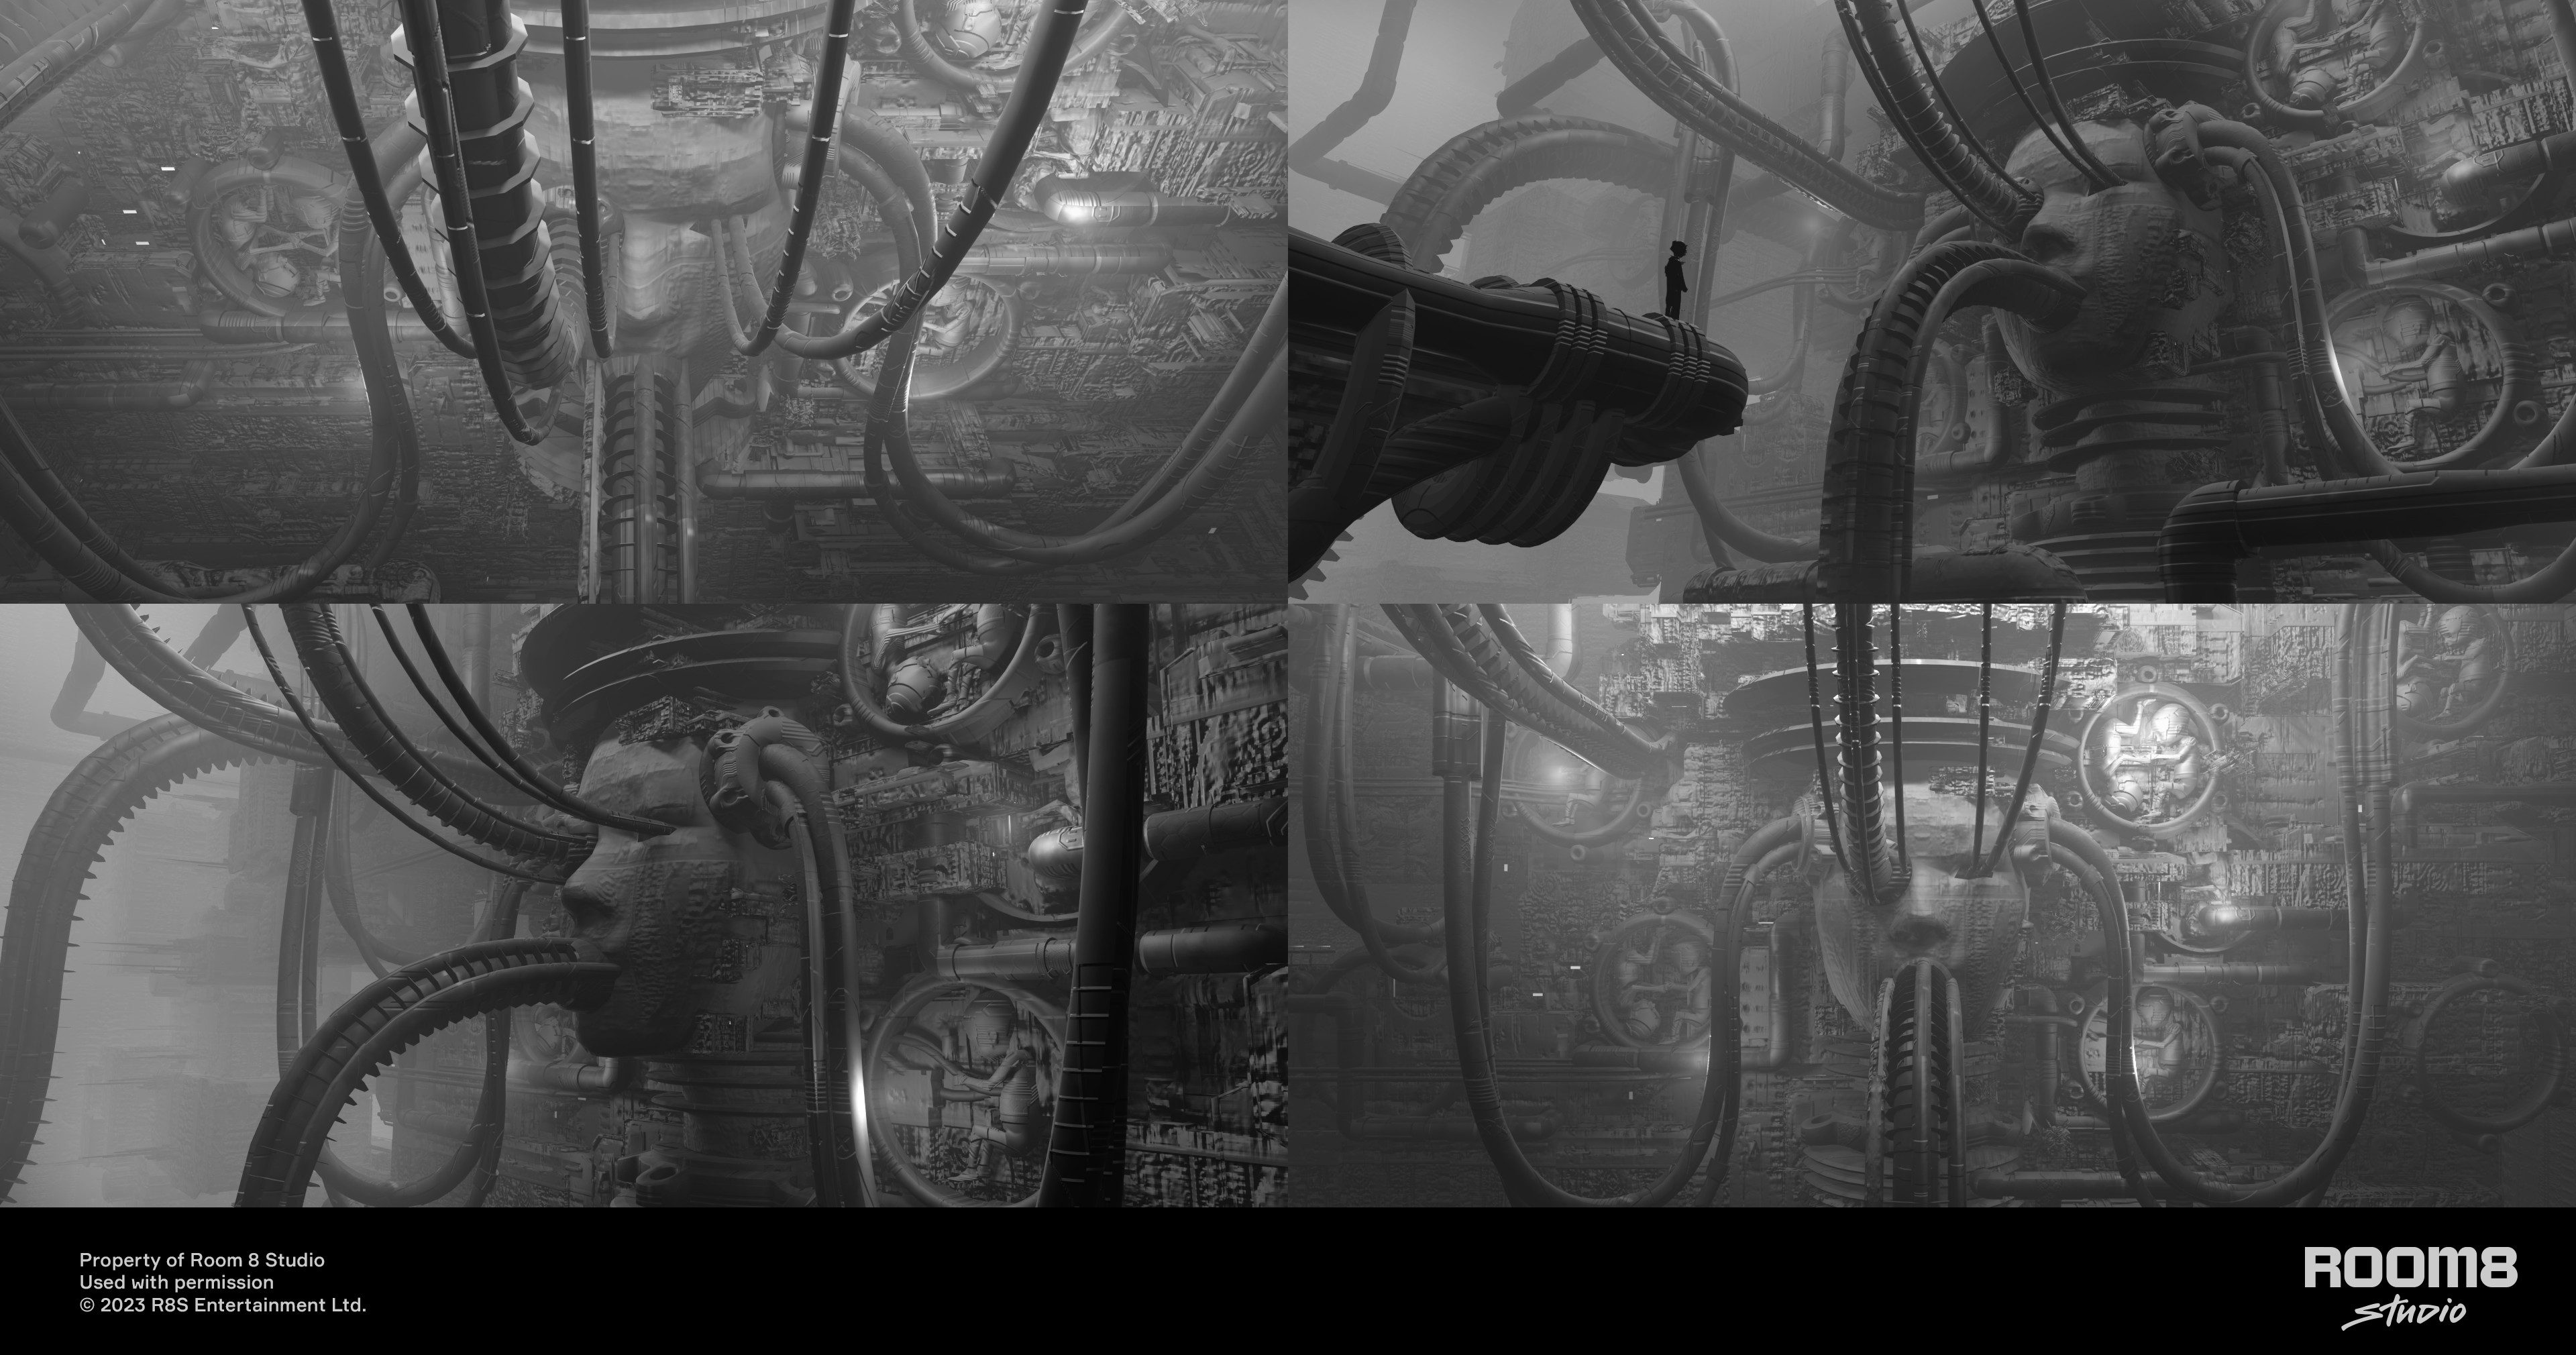 various camera angles/shots based on the 3rd composition sketch